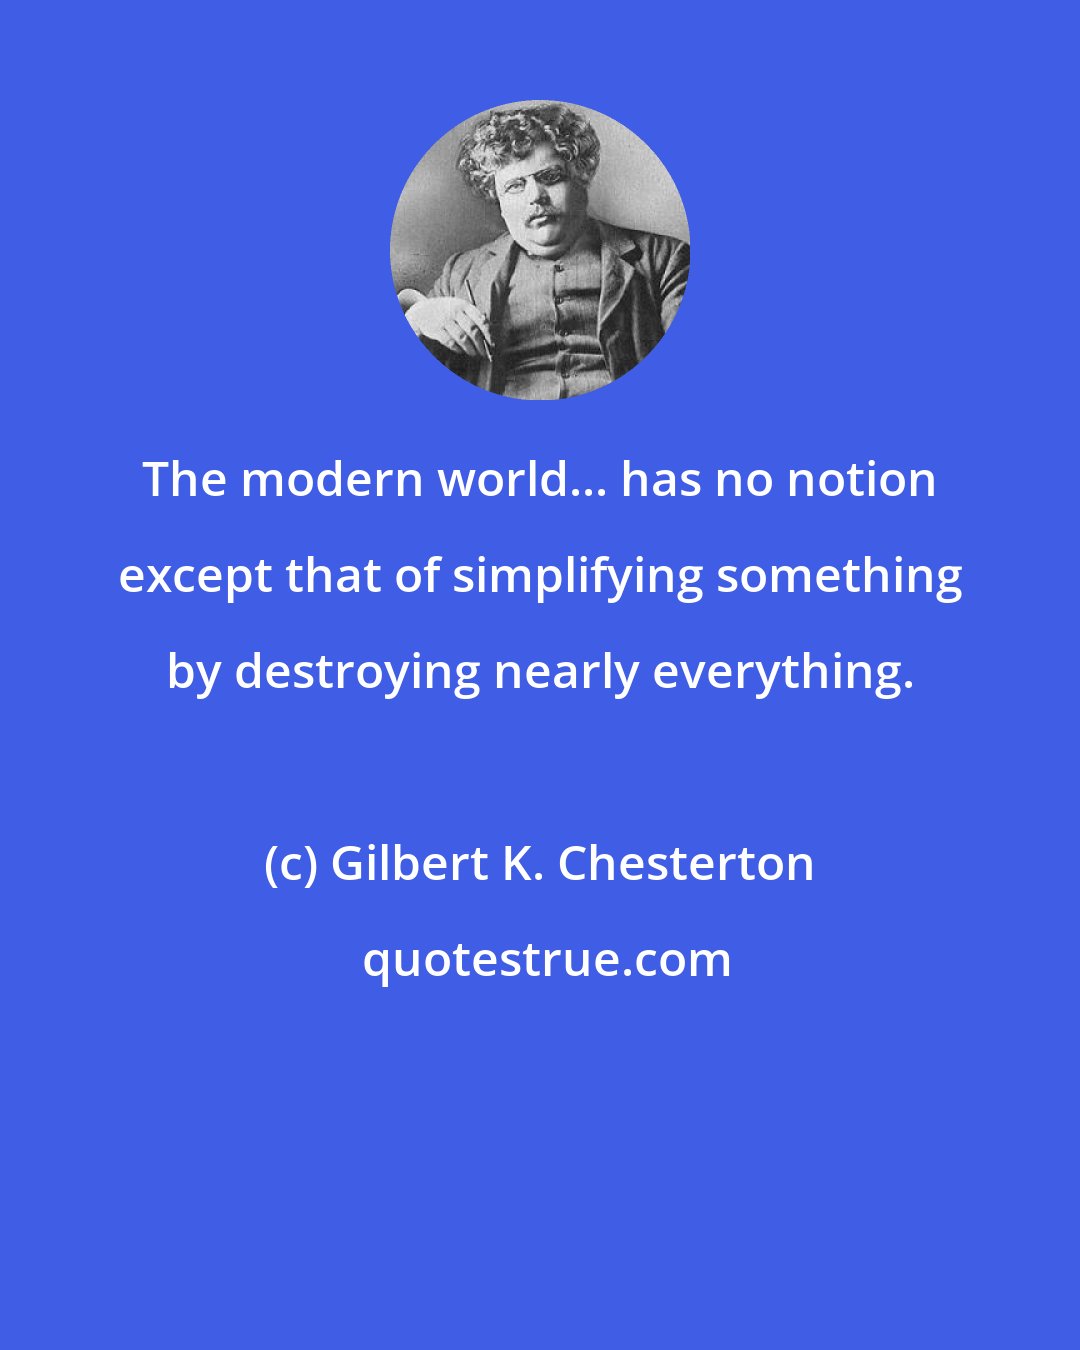 Gilbert K. Chesterton: The modern world... has no notion except that of simplifying something by destroying nearly everything.